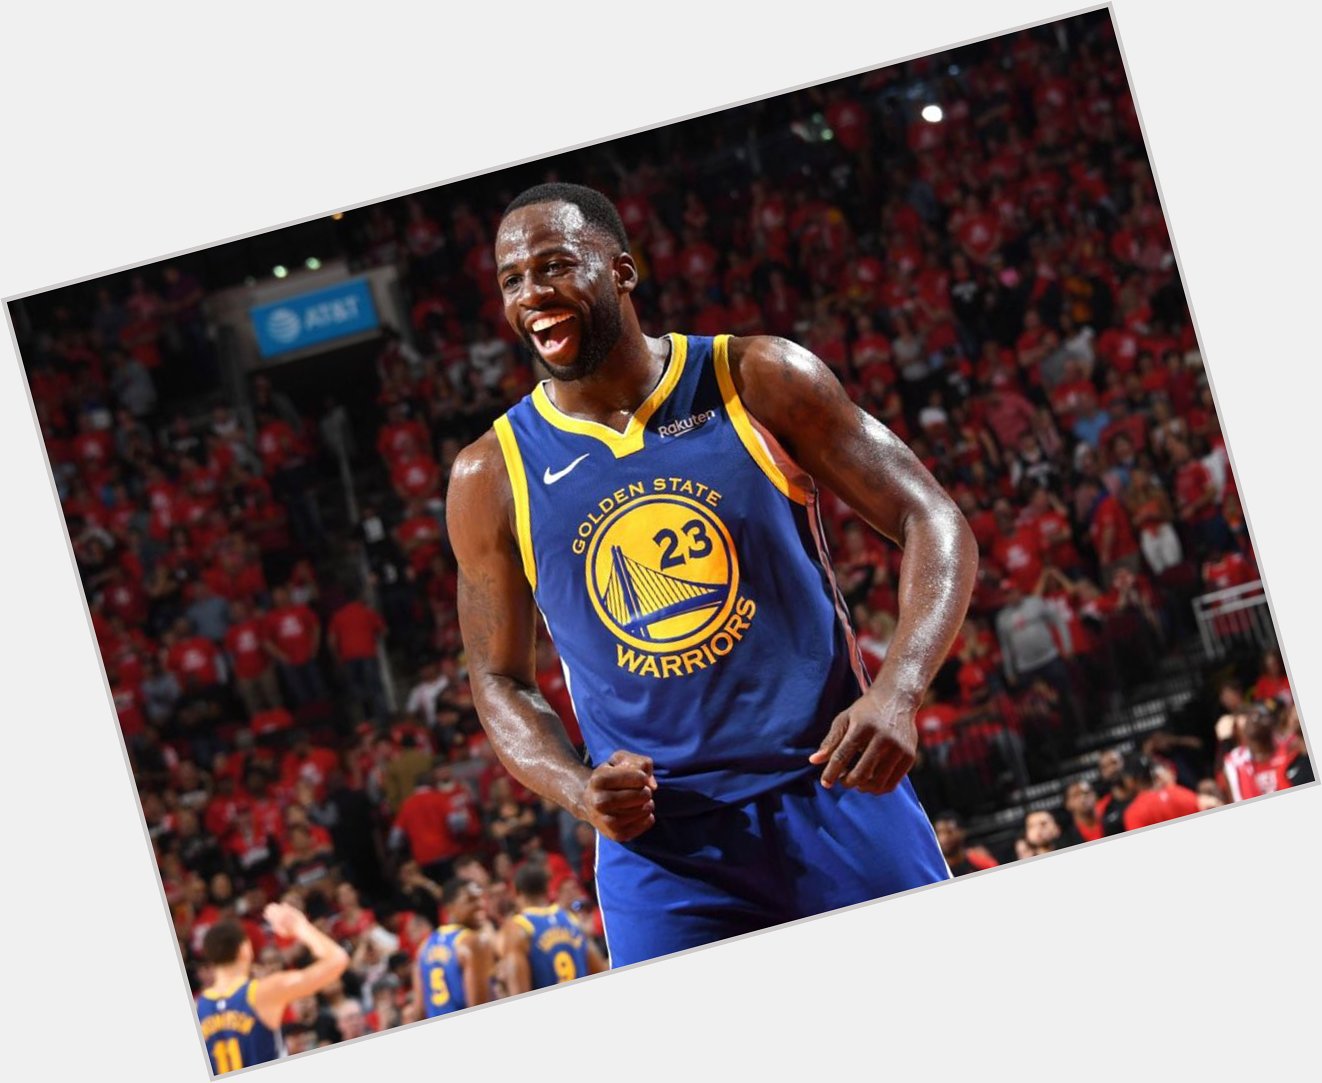 7 Kings Casino and Sportsbook wishes Draymond Green a Happy 31st Birthday! 